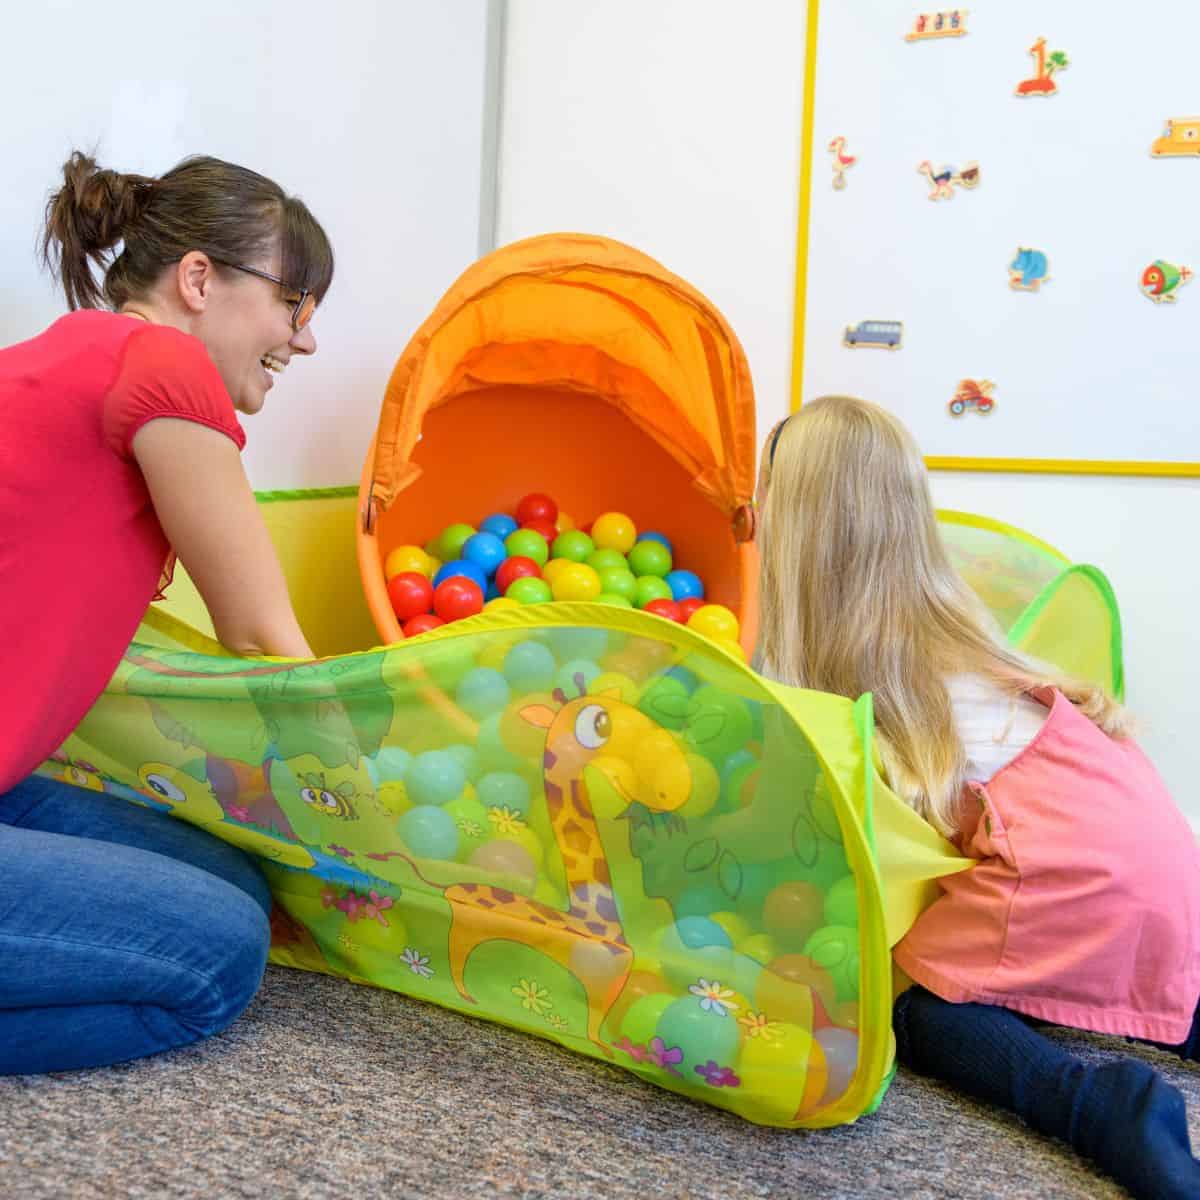 Occupational therapy for Autism is often recommended when a child is first diagnosed. Learn how OT can help your child with autism and what to expect!